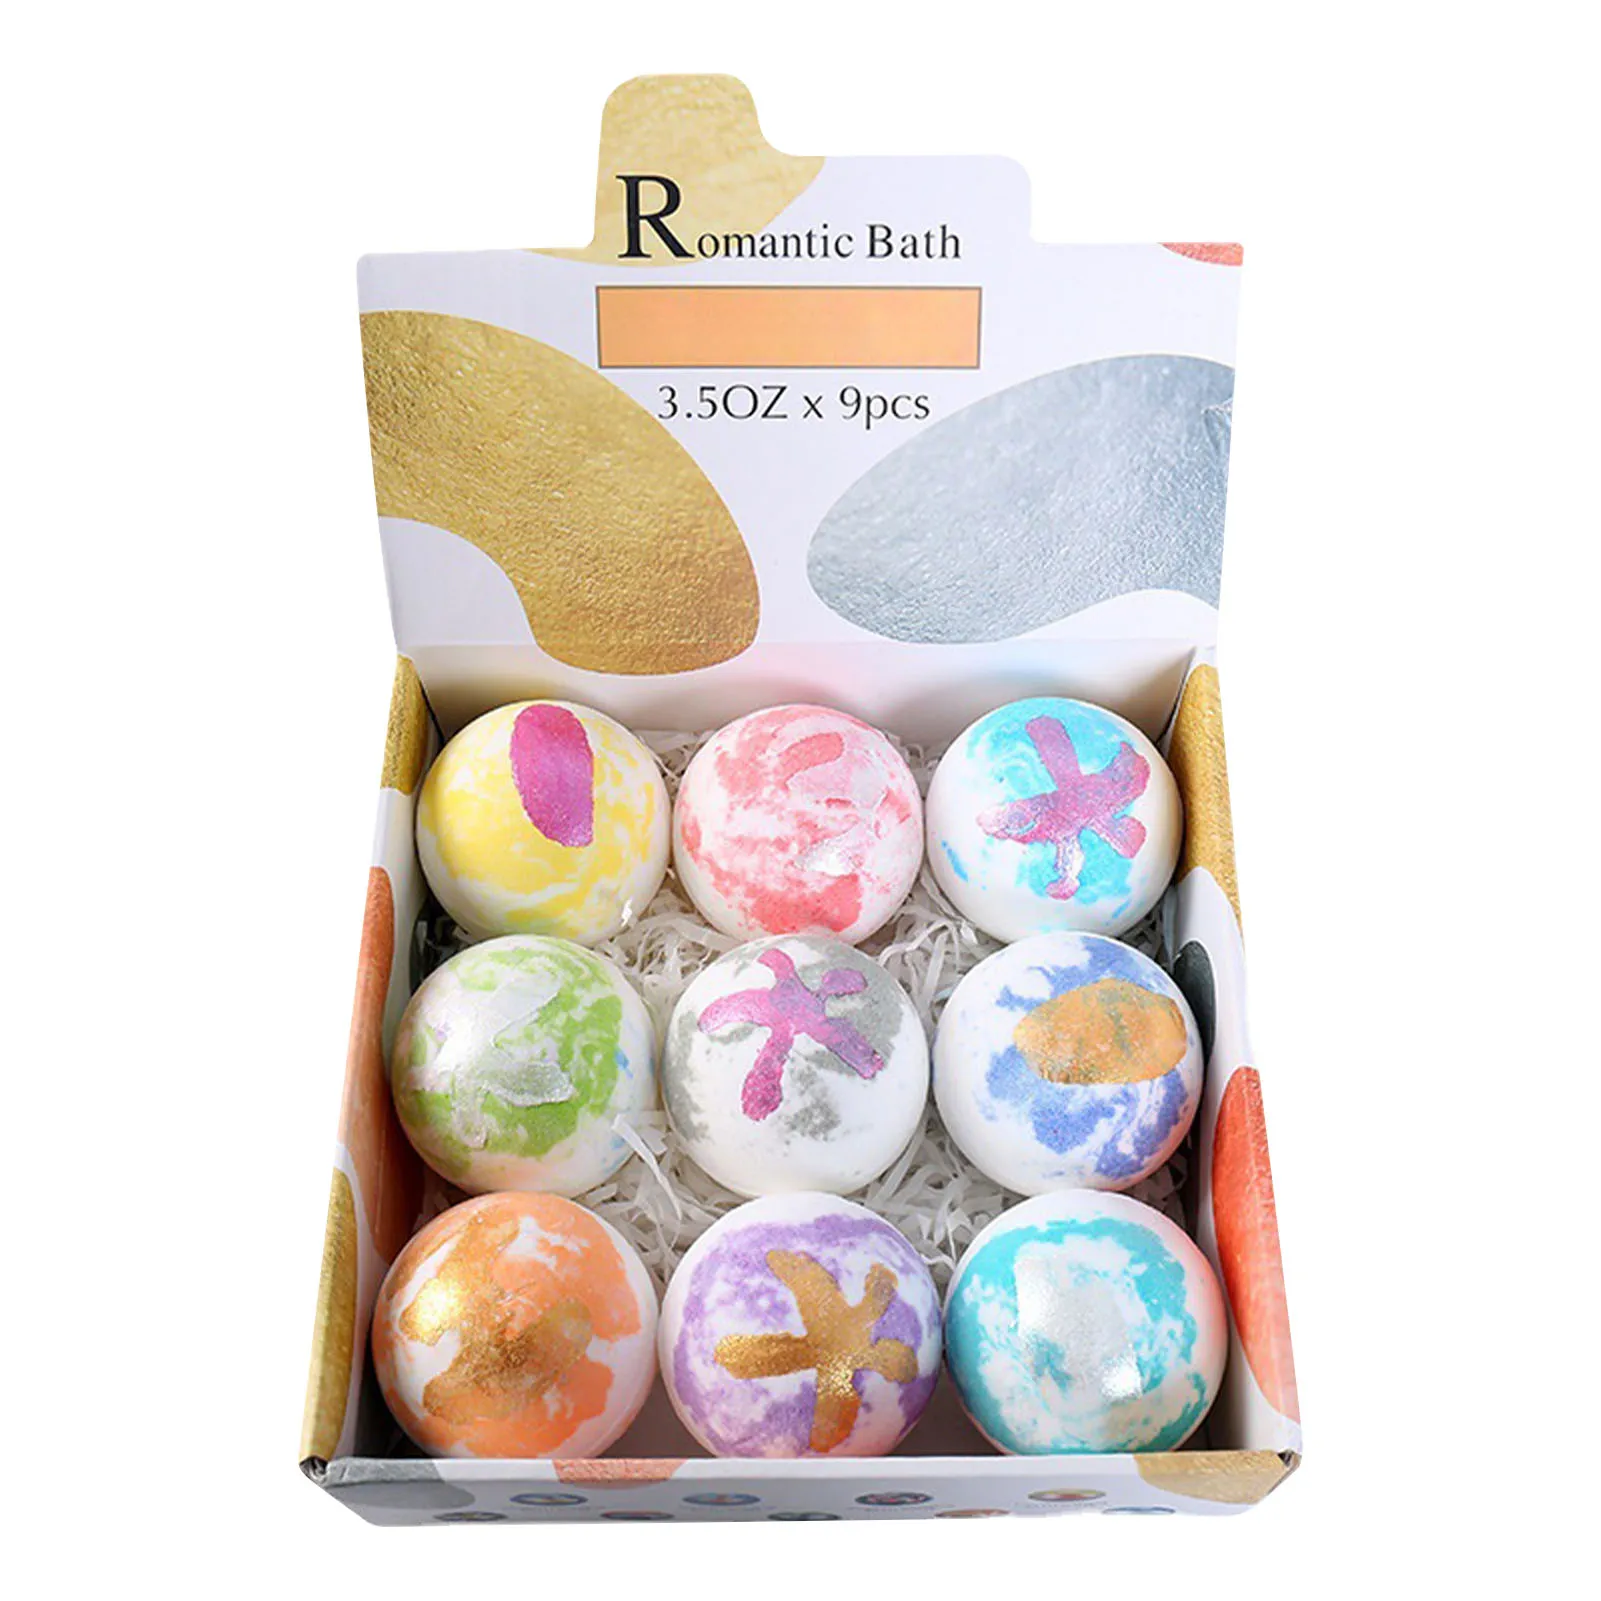 

Bath Bombs For Women Shower Bombs Aromatherapy 9pcs Aromatherapy Bath Bombs Crafted From Salt And Essential Oils Fizzy Spa